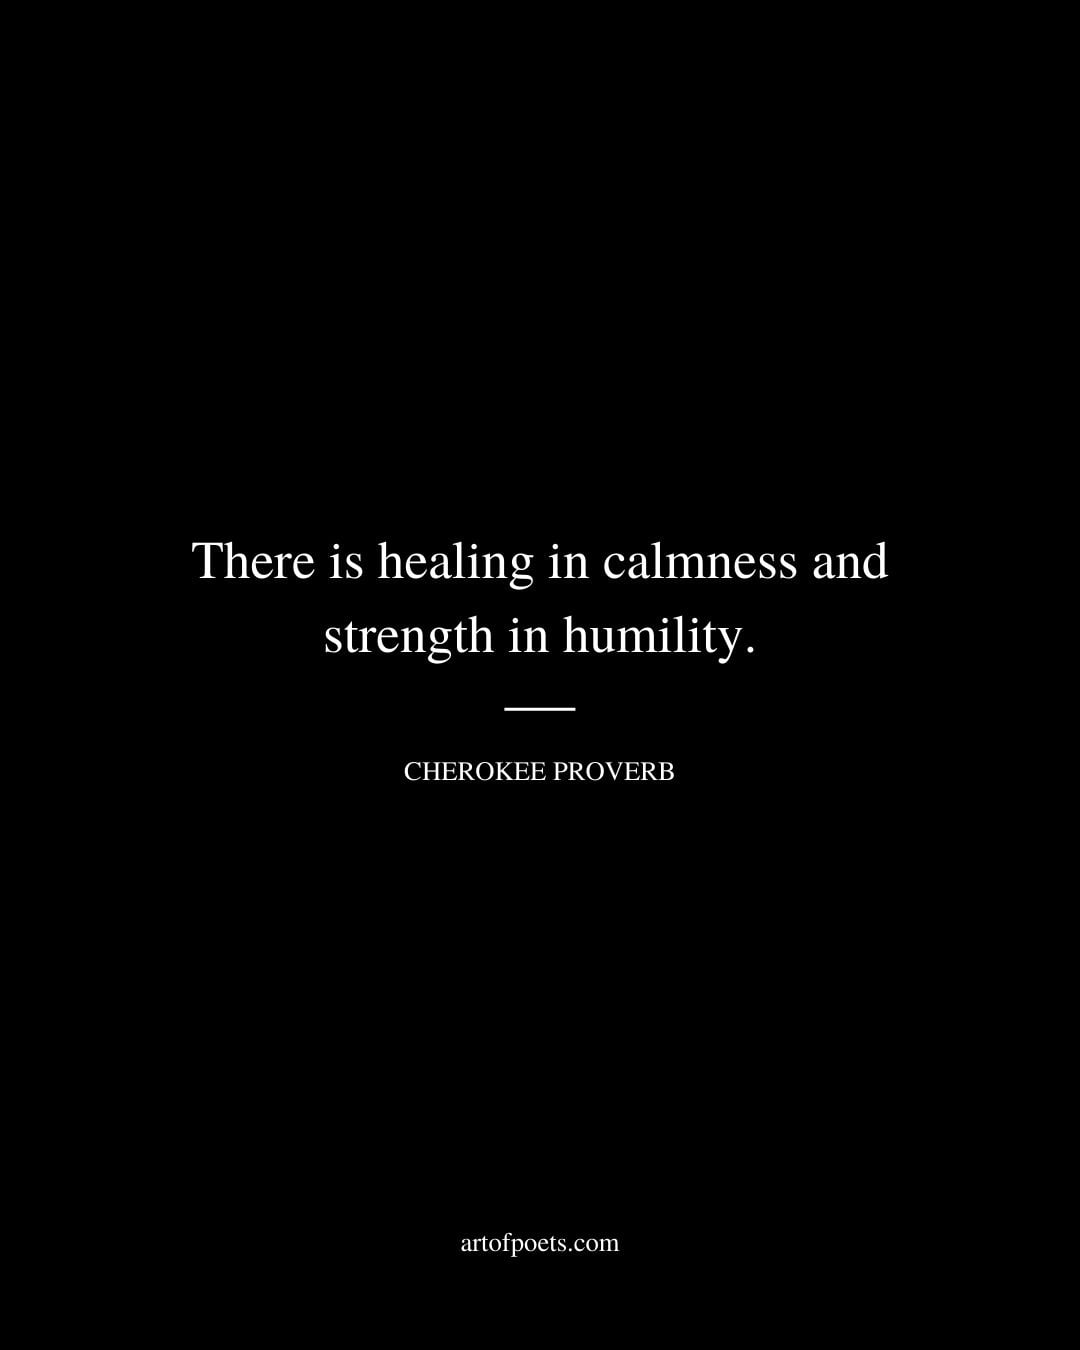 There is healing in calmness and strength in humility